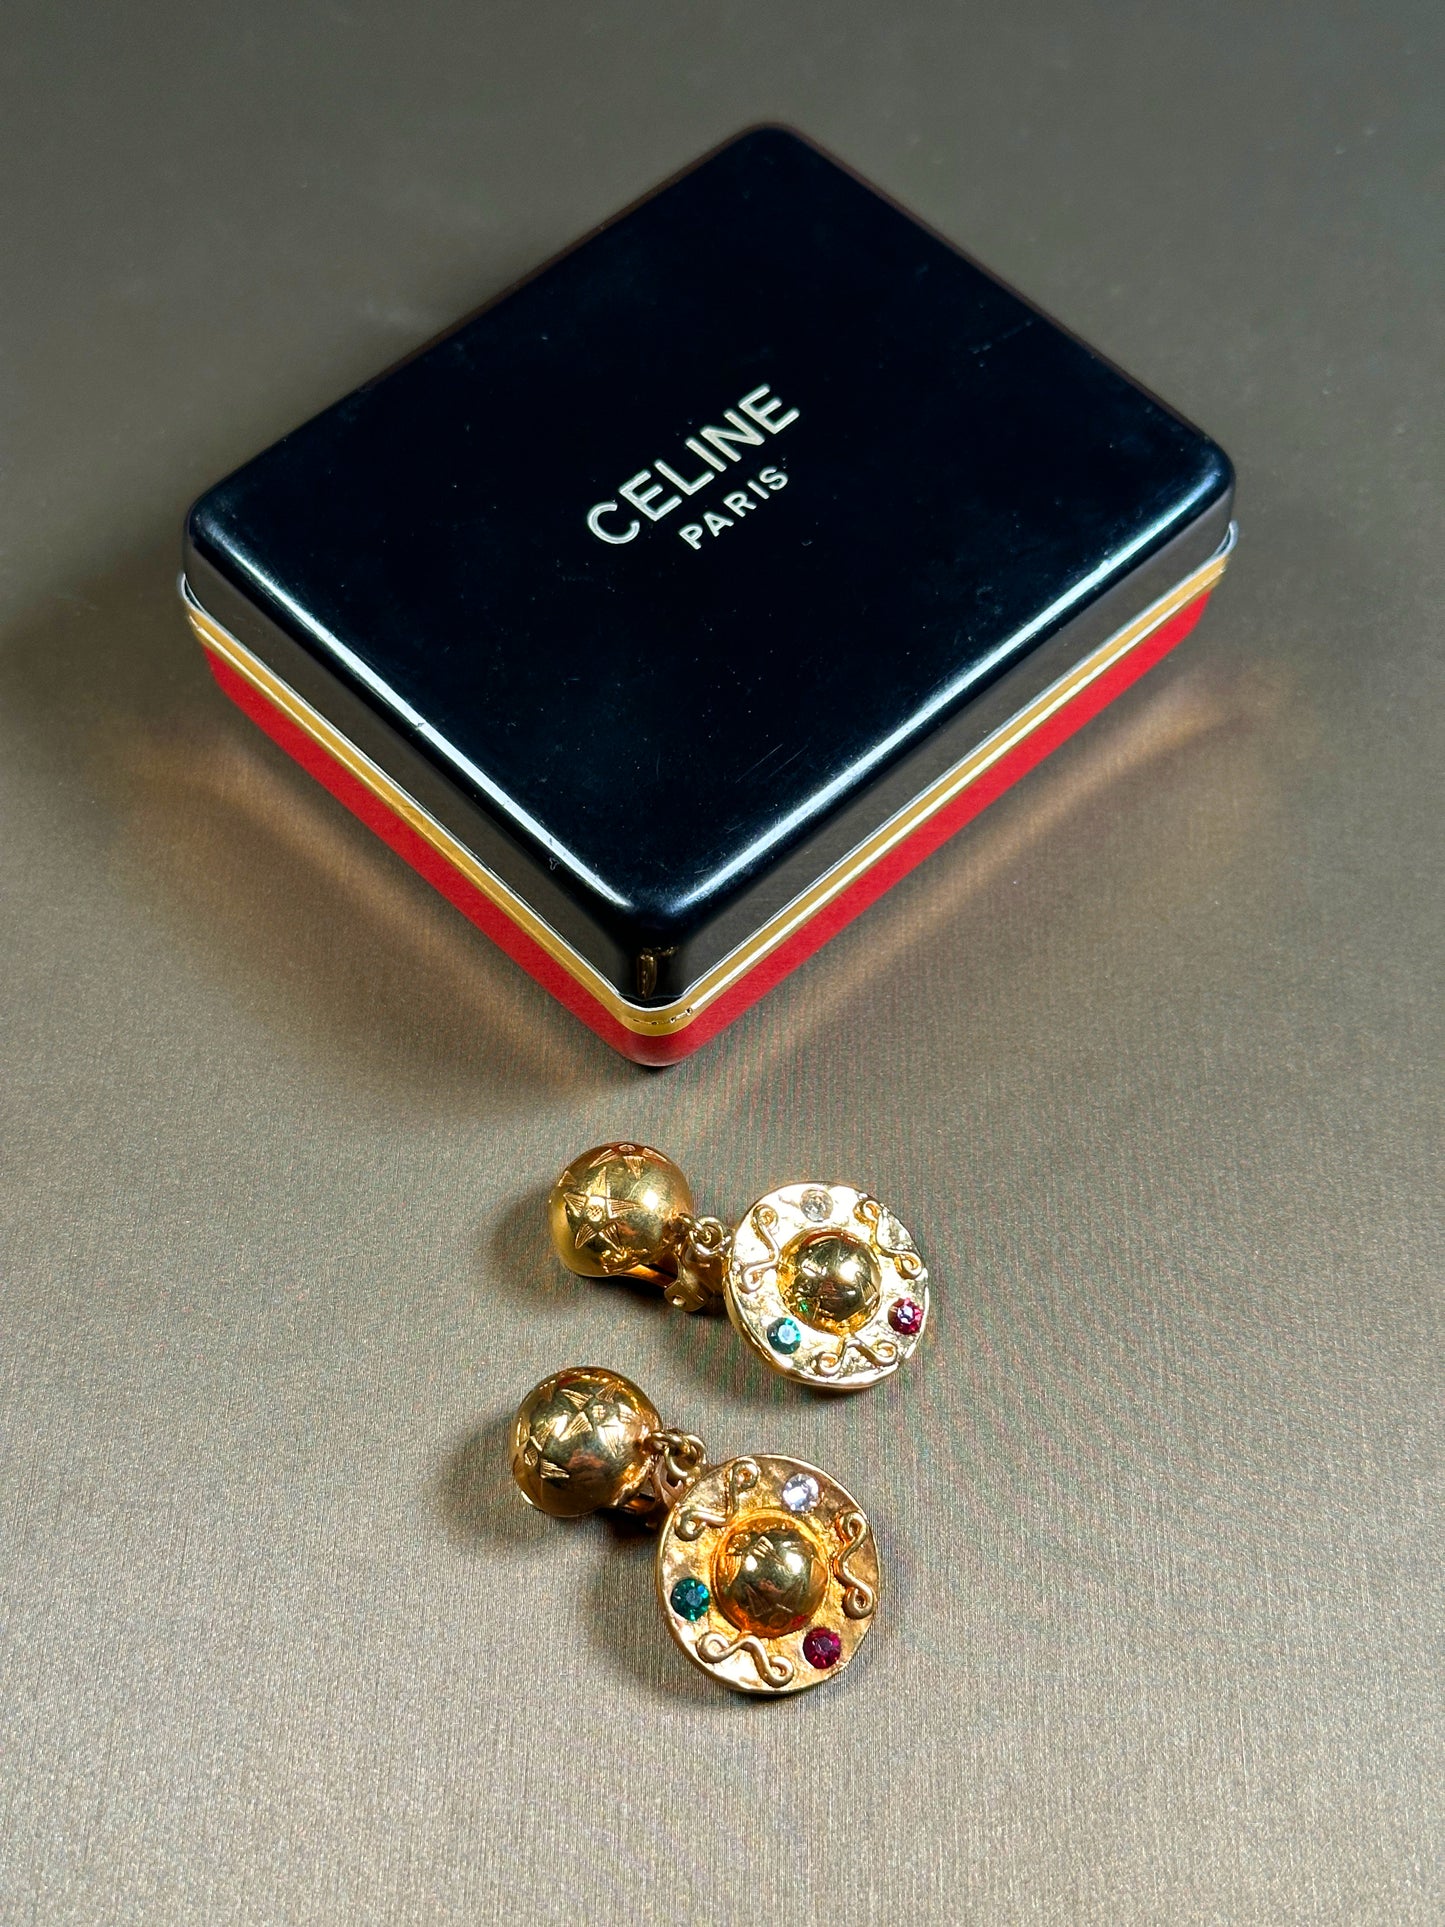 CELINE VINTAGE 100% Authentic Genuine Clip On Earrings in Gold, 1990's, Great Condition, with Original Box